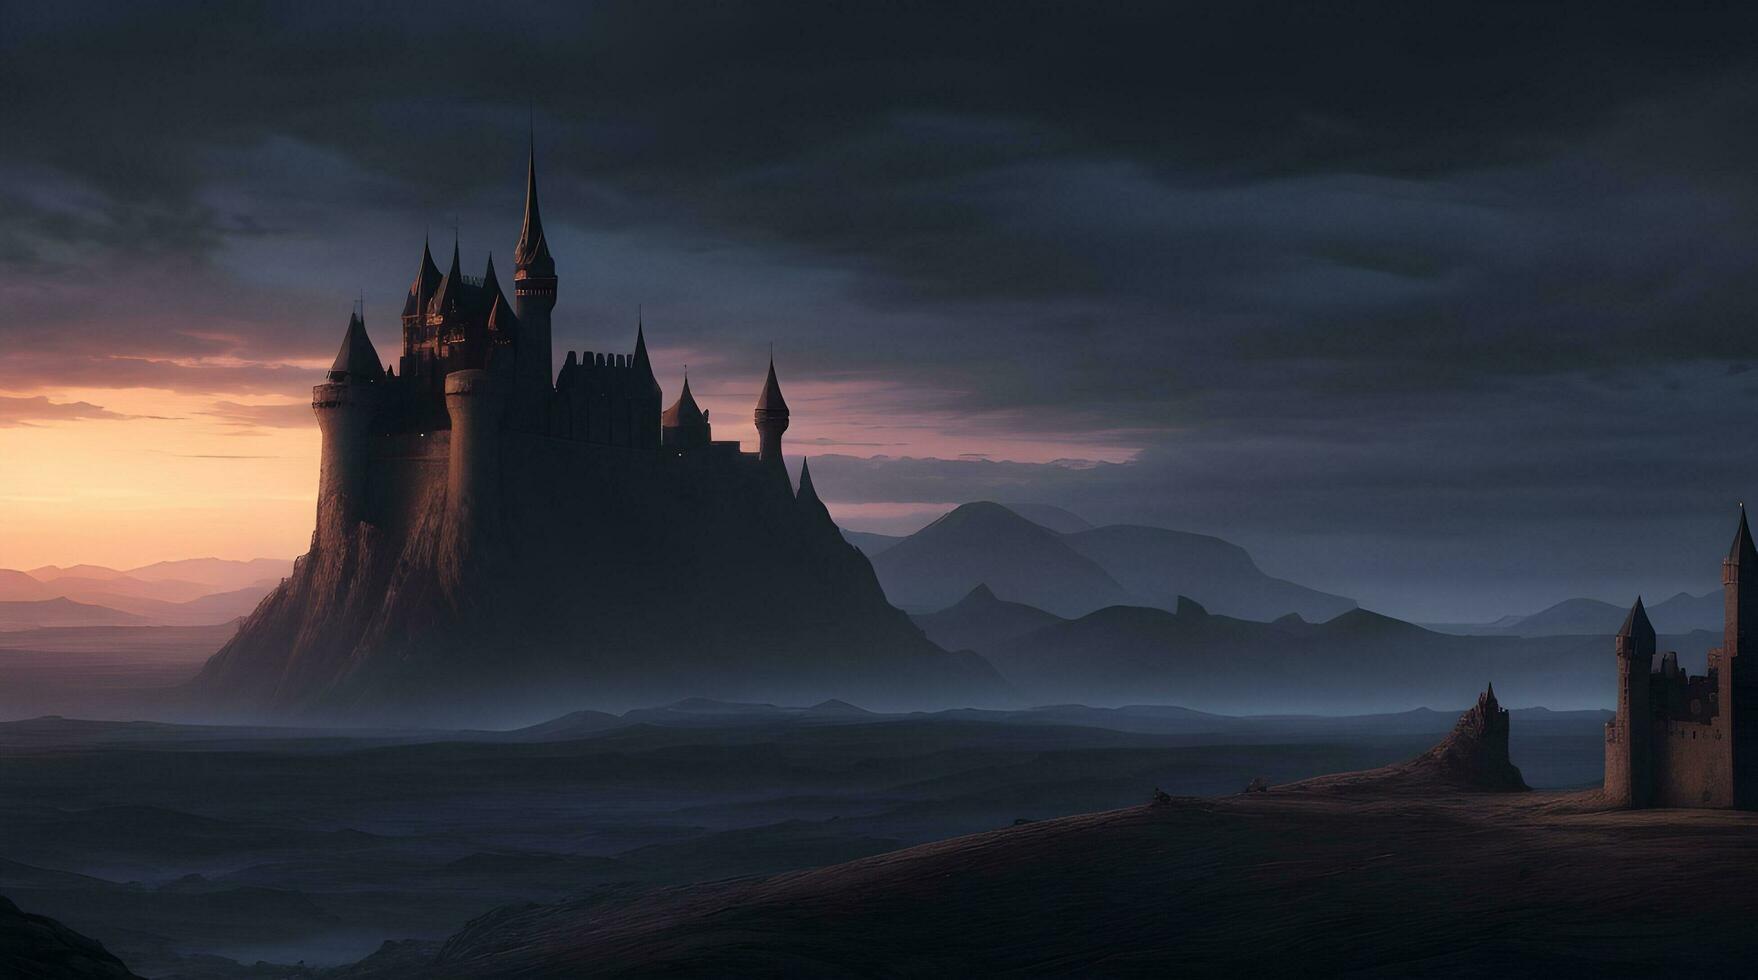 HD wallpaper that captures the essence of a fantasy world's nighttime photo